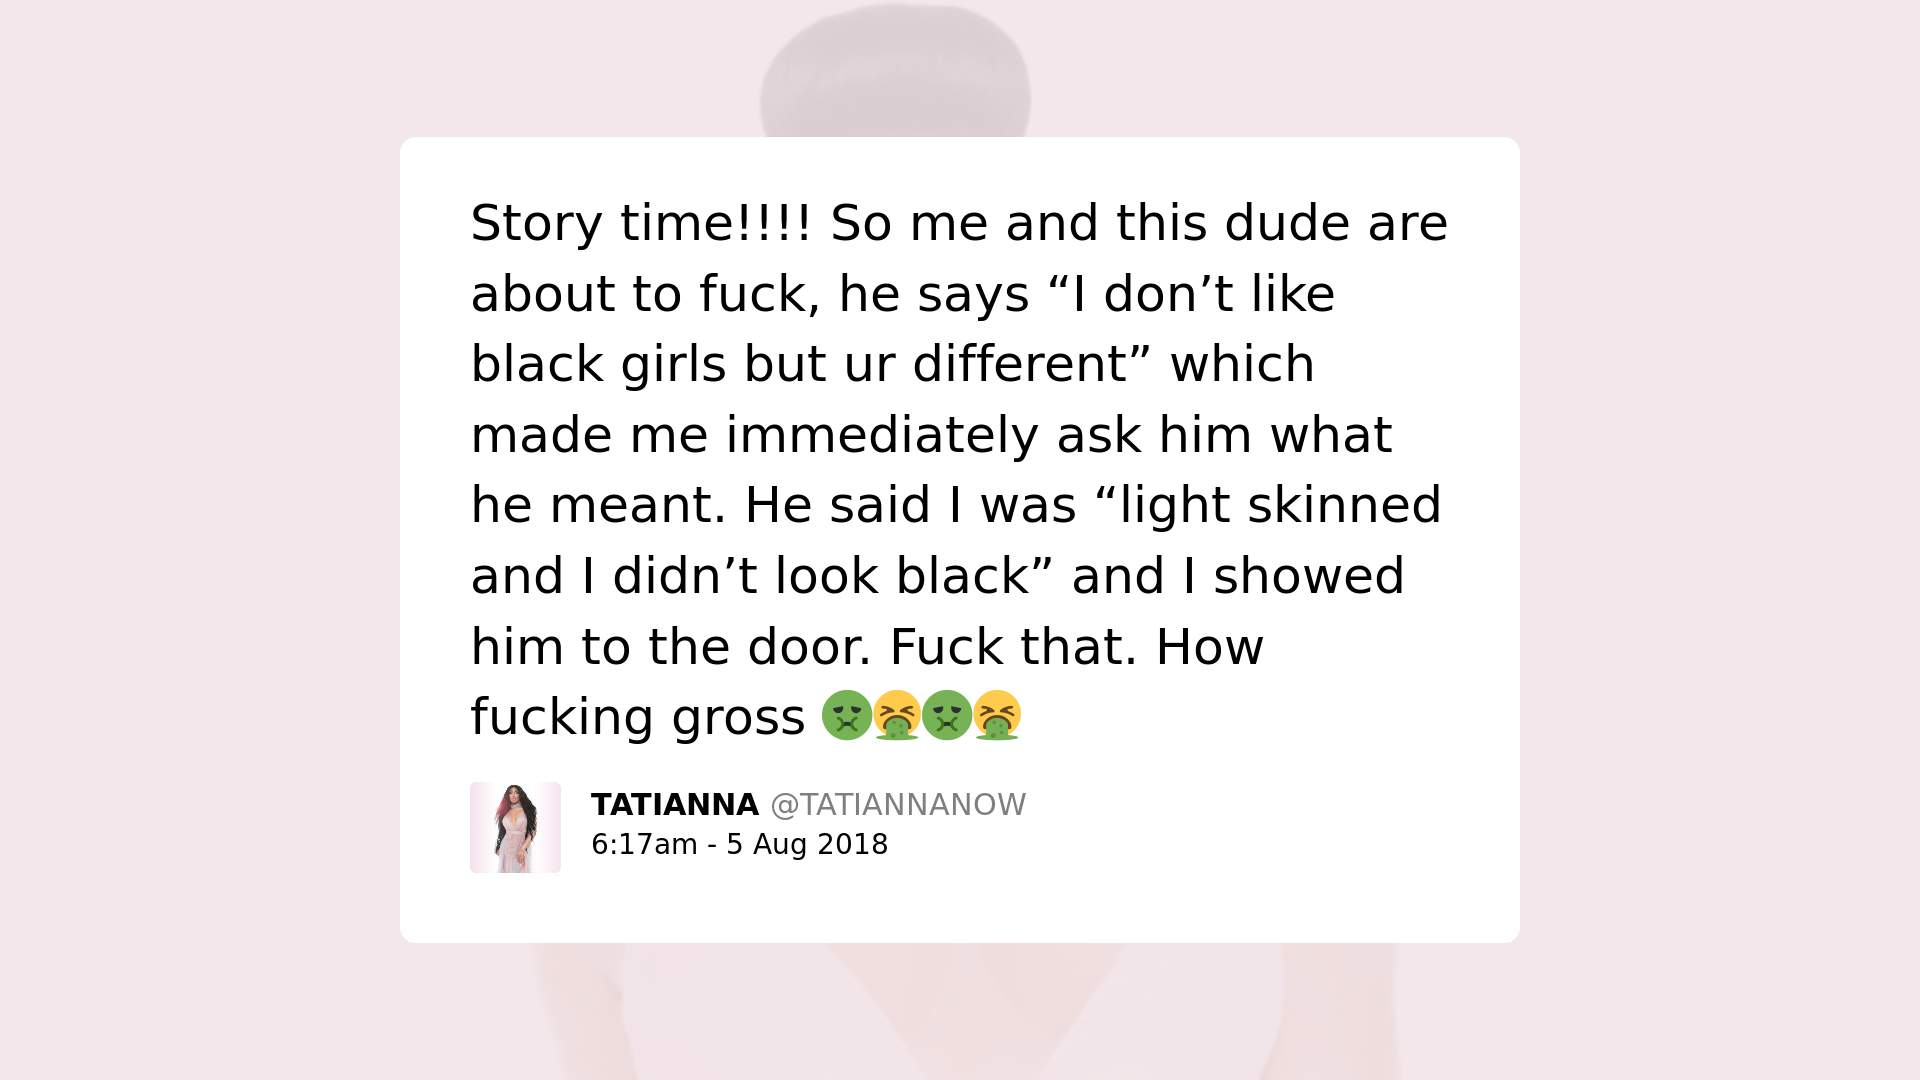 Print screen de postagem de Tatianna Now com o texto: Story time!!! So me and this dude are about to fuck, he says "I don't like black girls but ur different" which made me immediately ask him what he meant. He said I was "light skinned and I didn't look black" and I showed him the door. Fuck that. How fucking gross. 